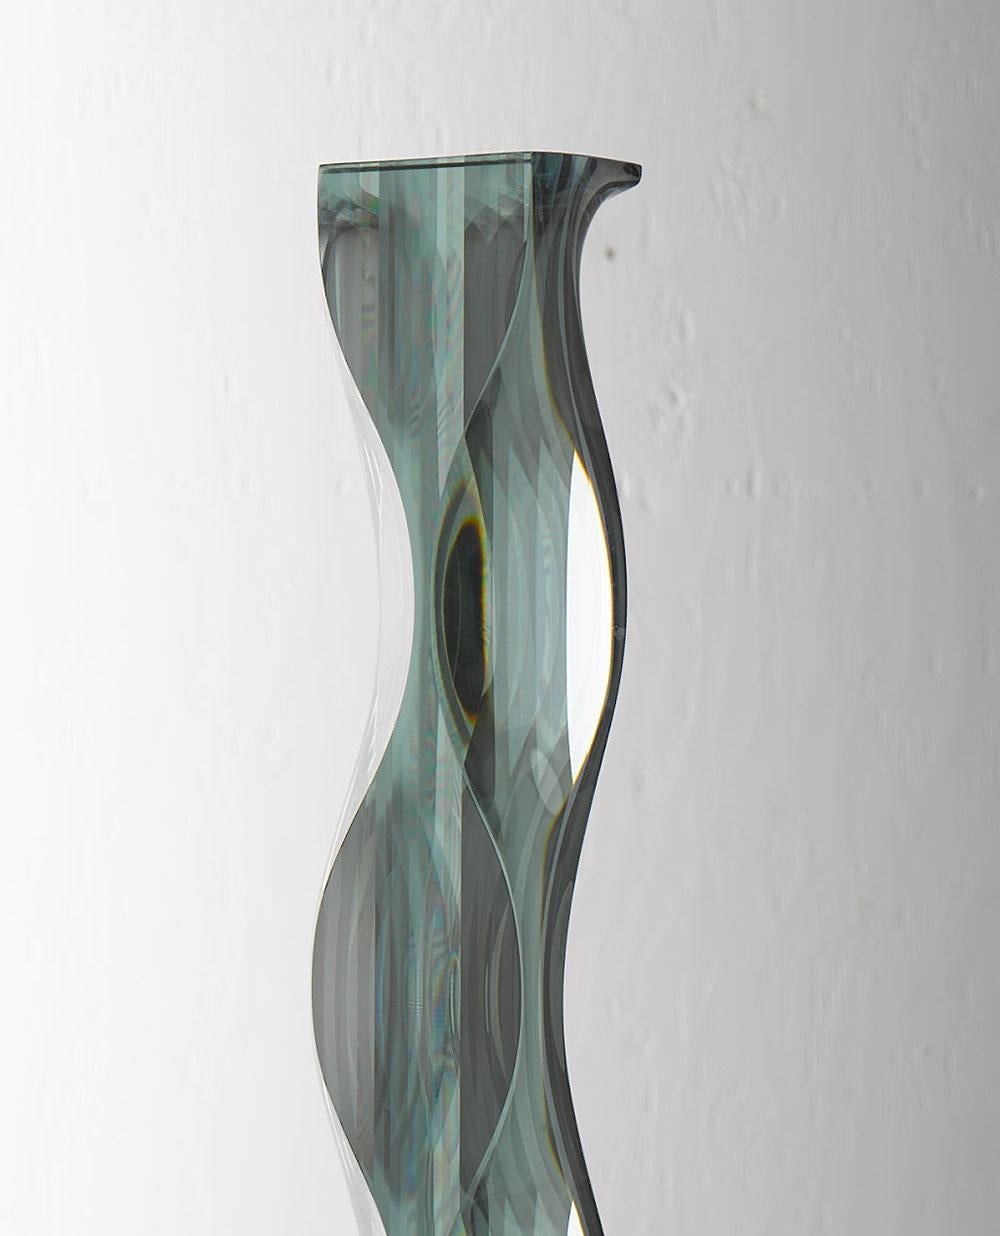 M.180603 by Toshio Iezumi - Contemporary glass sculpture, green, abstract For Sale 1